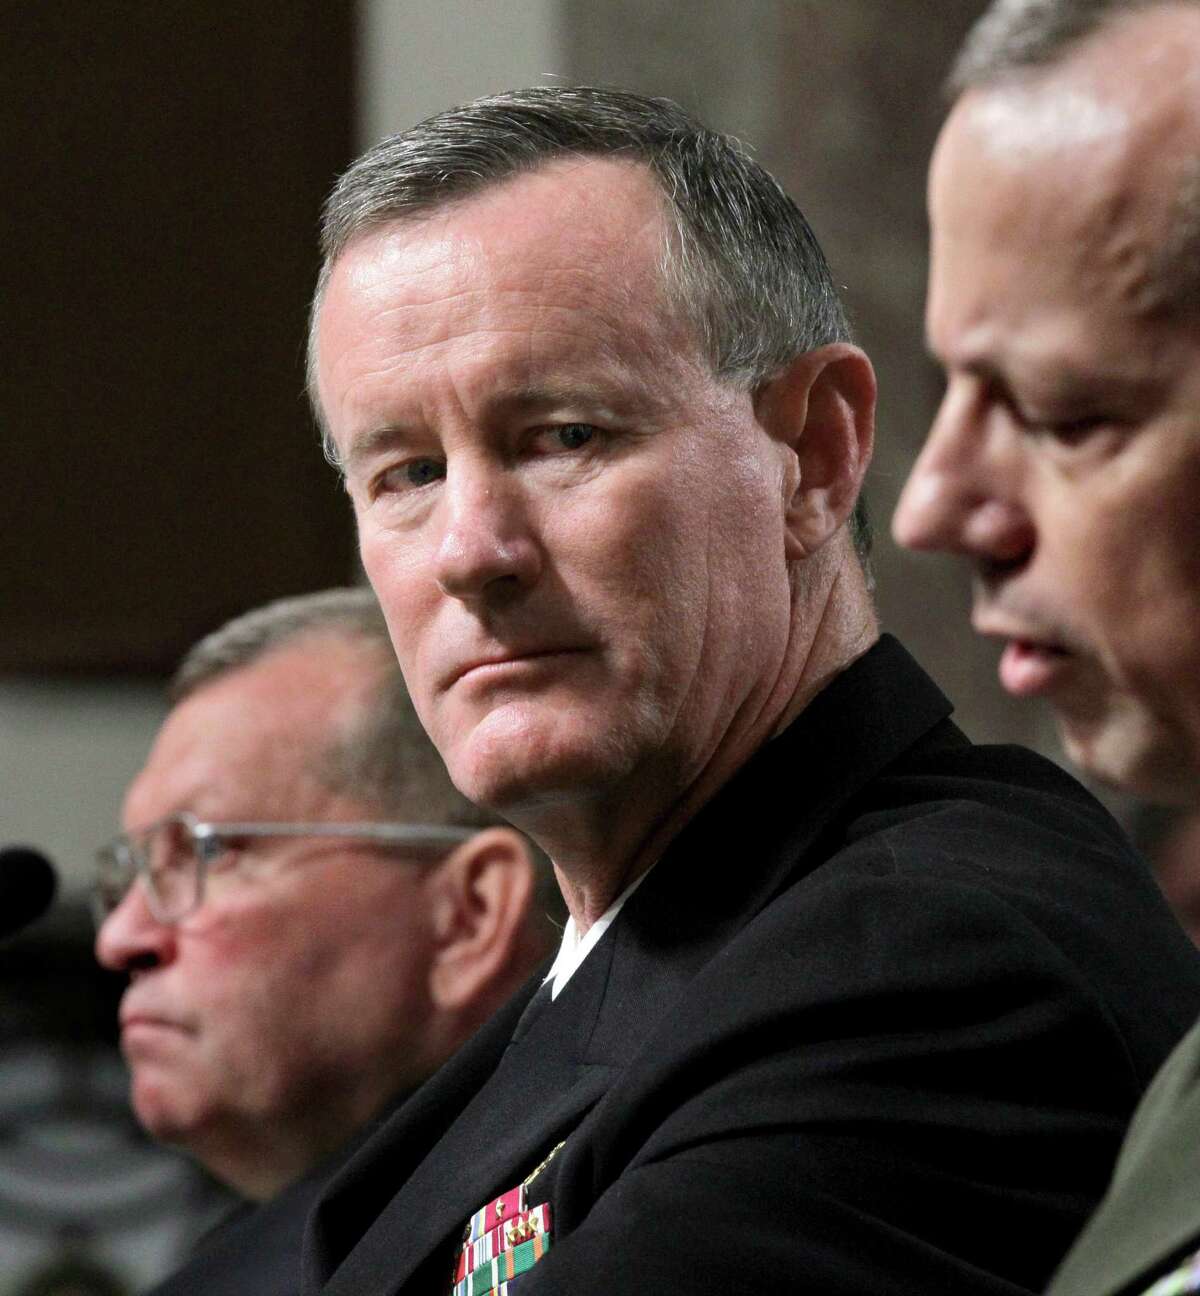 Adm. William McRaven will return to UT in January as chancellor.